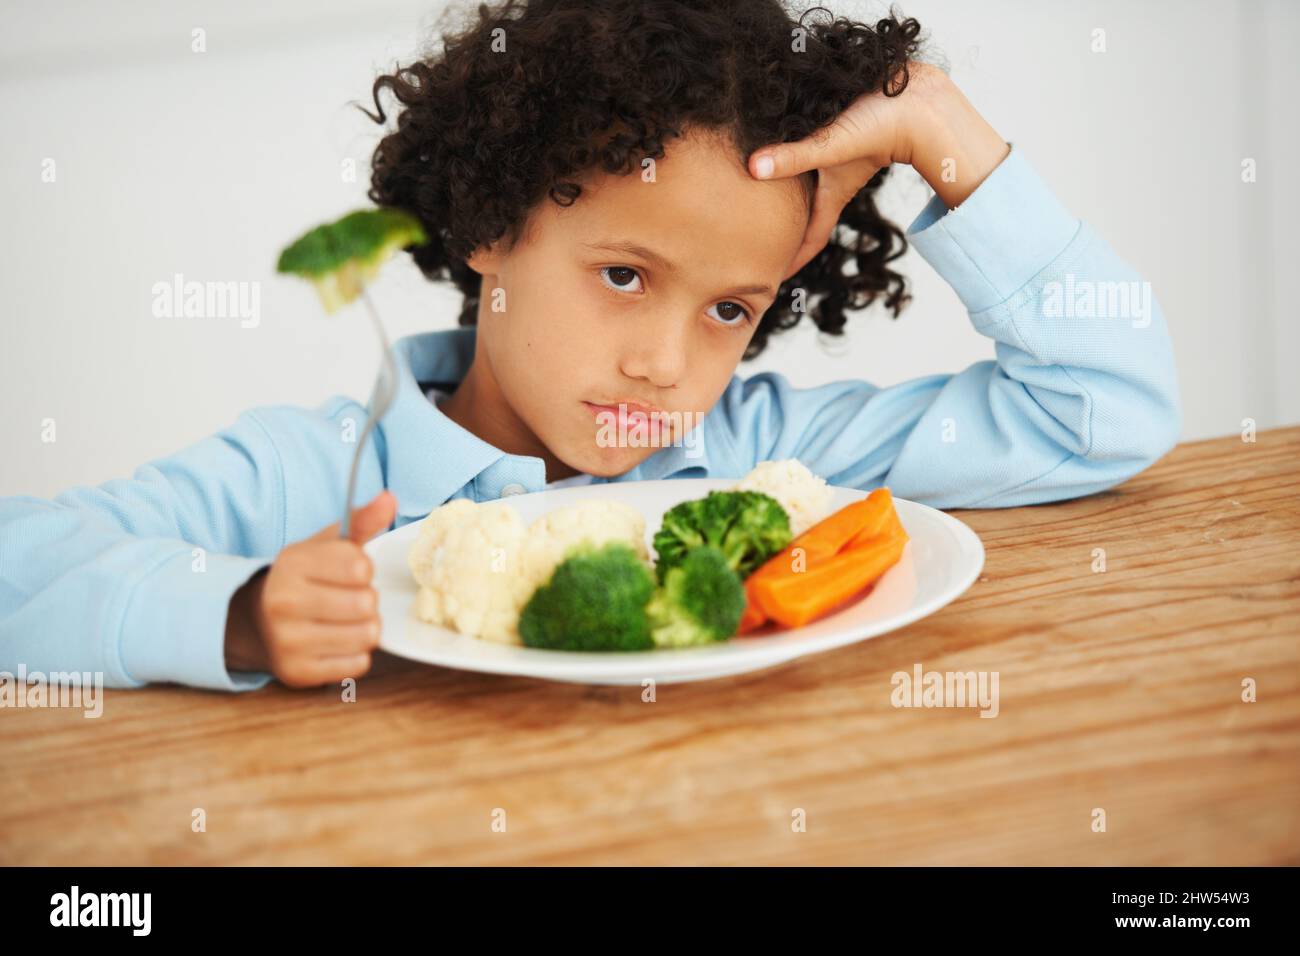 Broccoli again. Shot of an unimpressed-looking little boy sitting in front of a plate of vegetables. Stock Photo